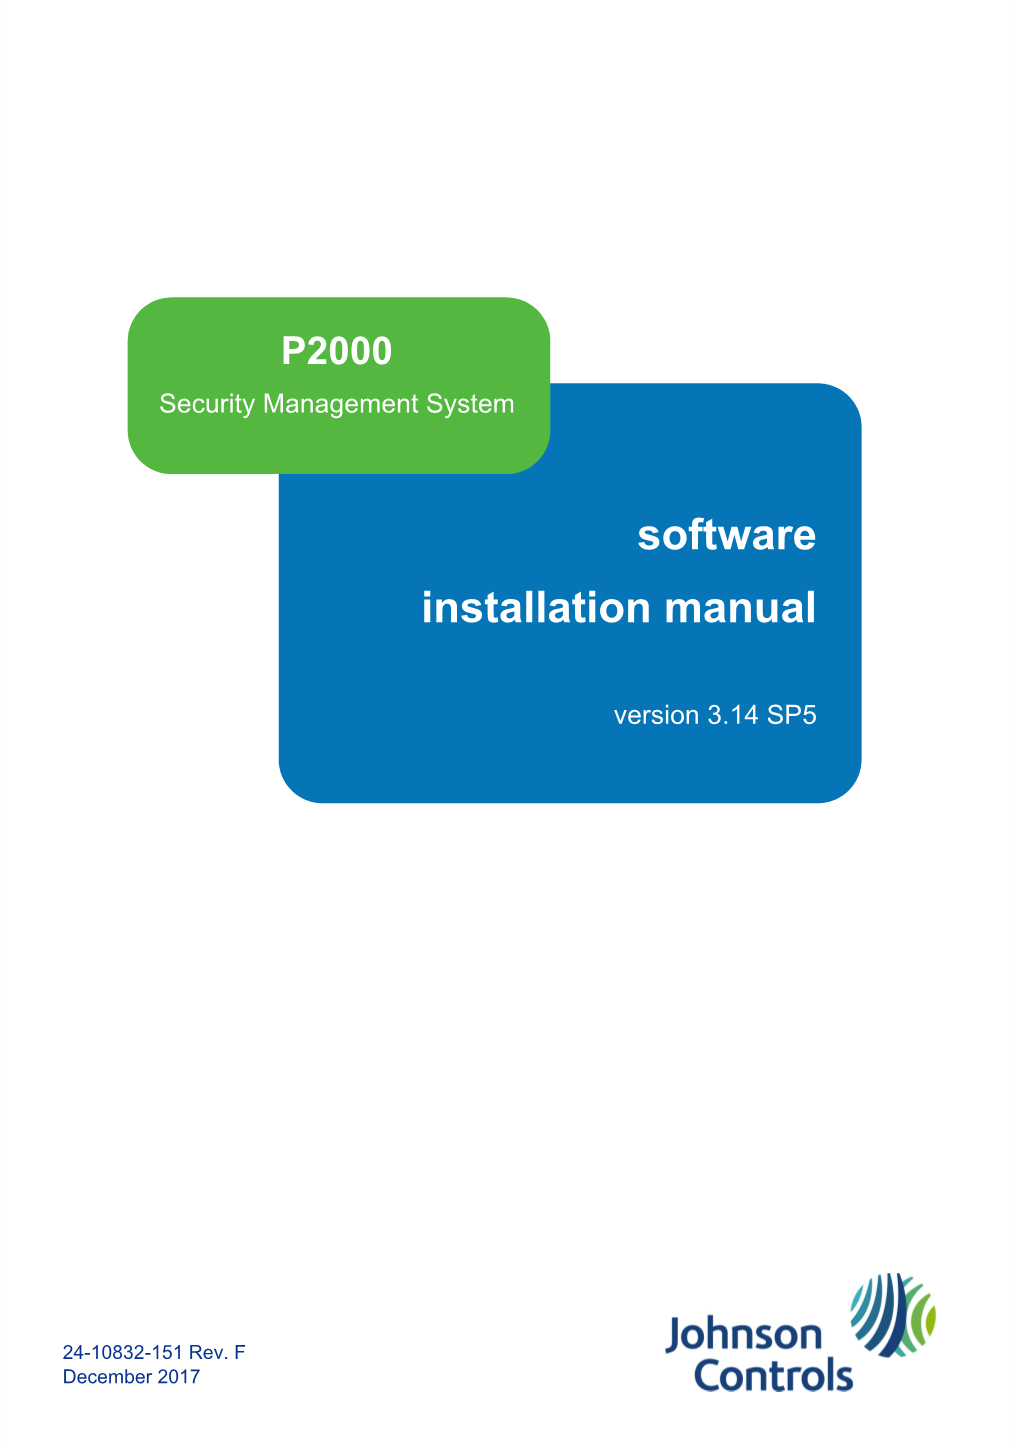 P2000 SMS Version 3.14 SP5 Software Installation Guide